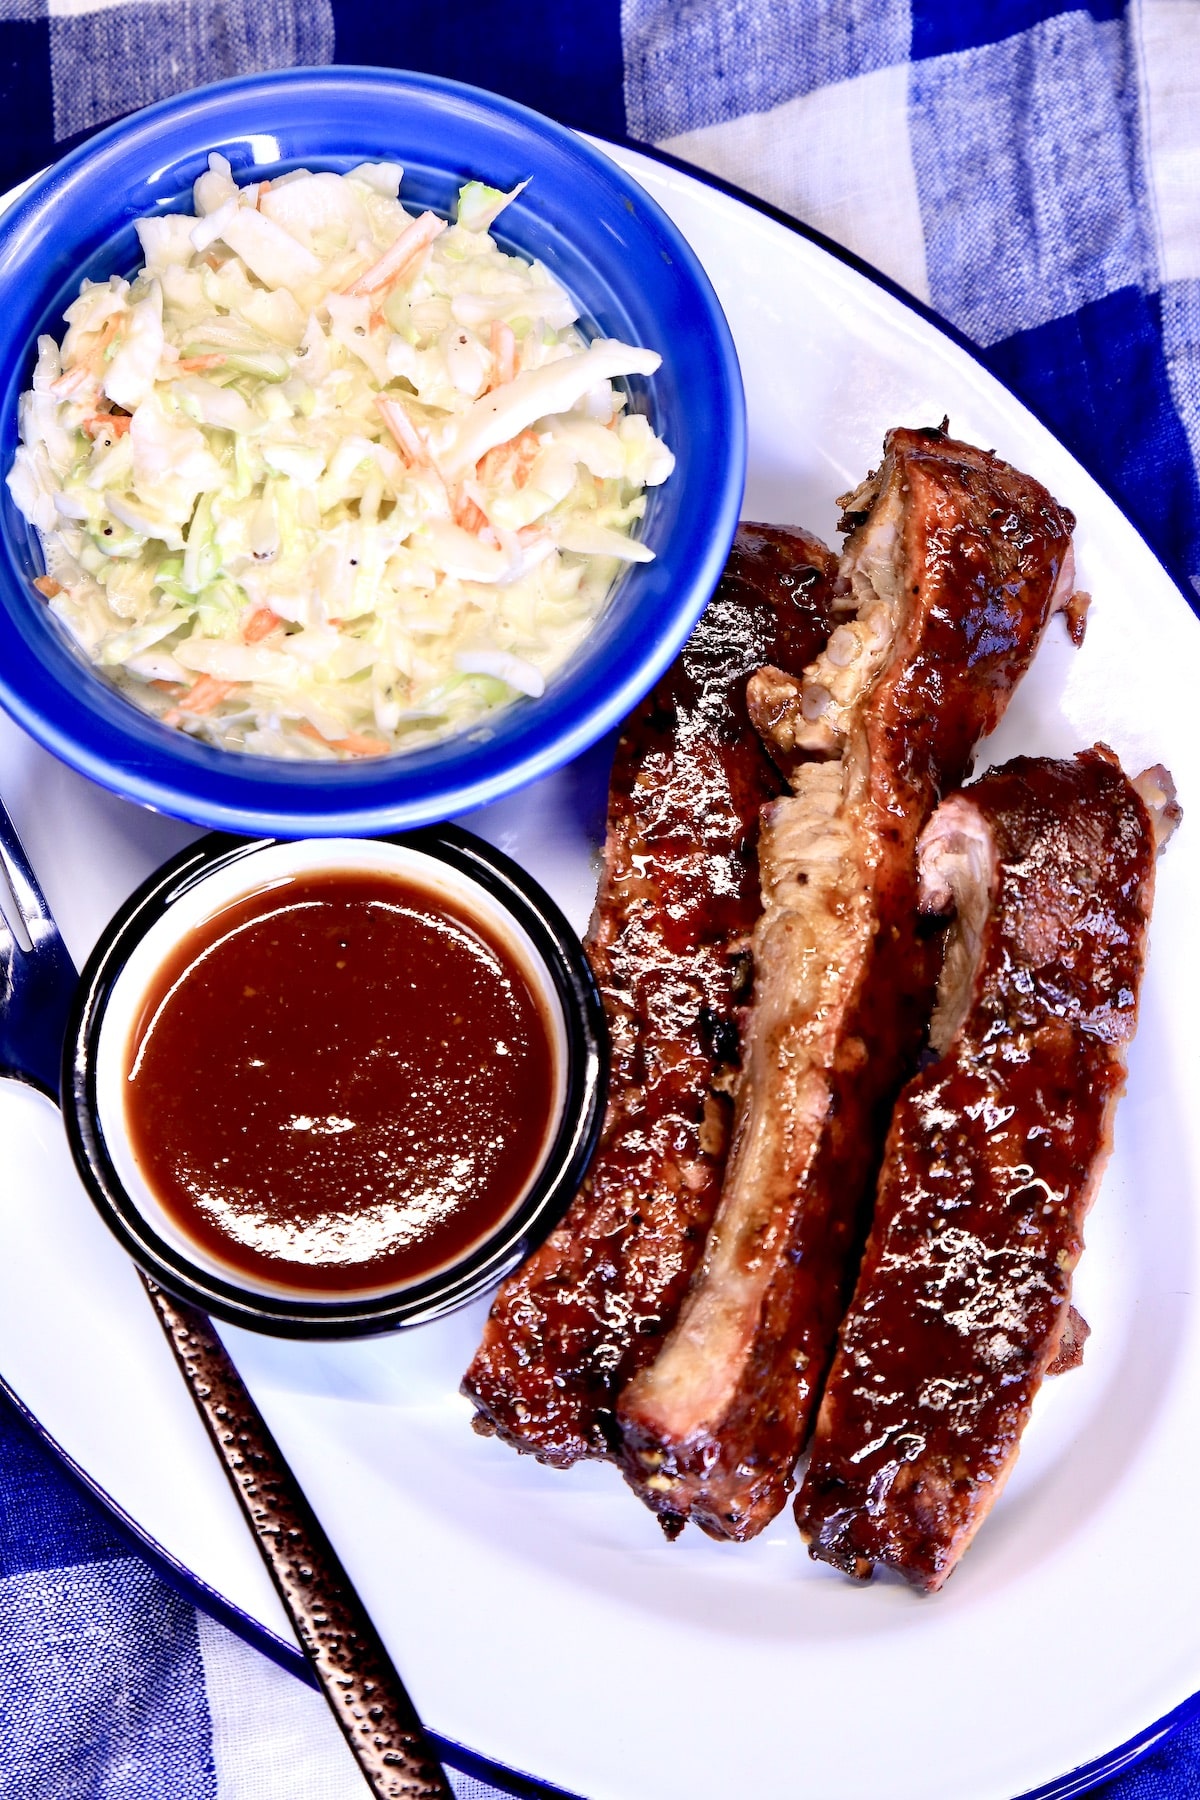 Platter with bbq ribs, bowl of slaw, bowl of sauce.